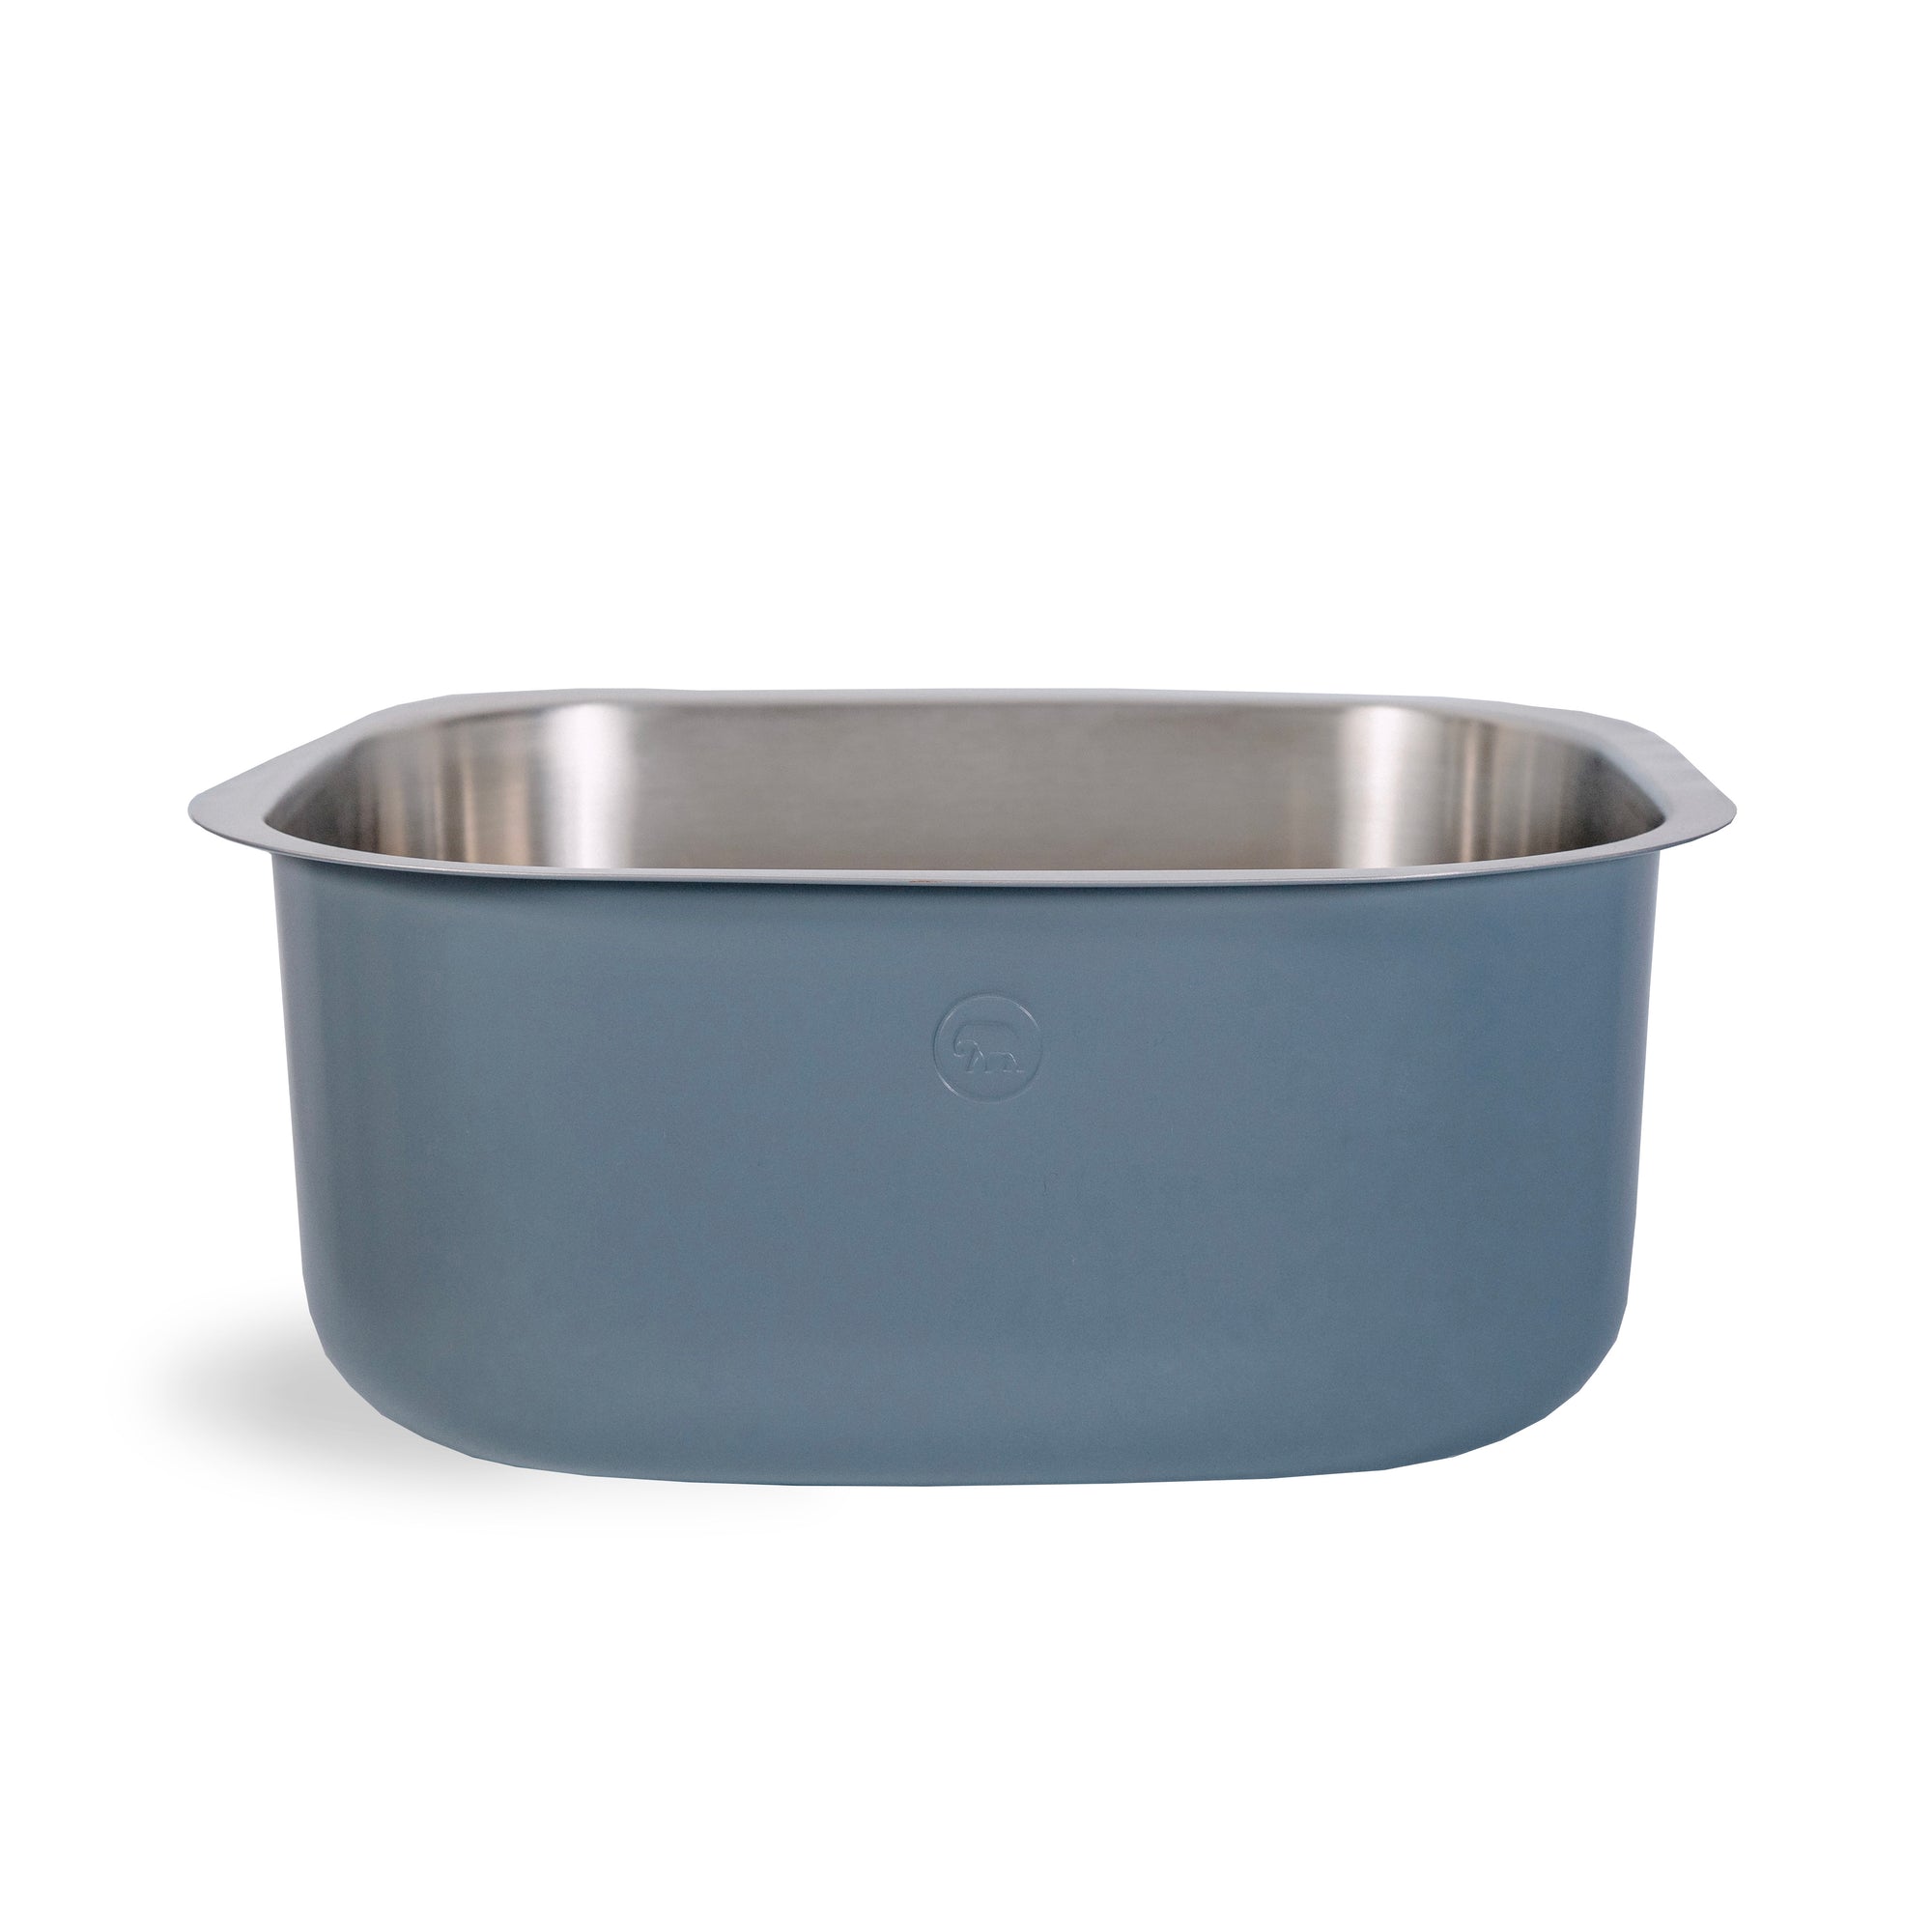 Colour Stainless Steel Washing Up Bowl - Seconds